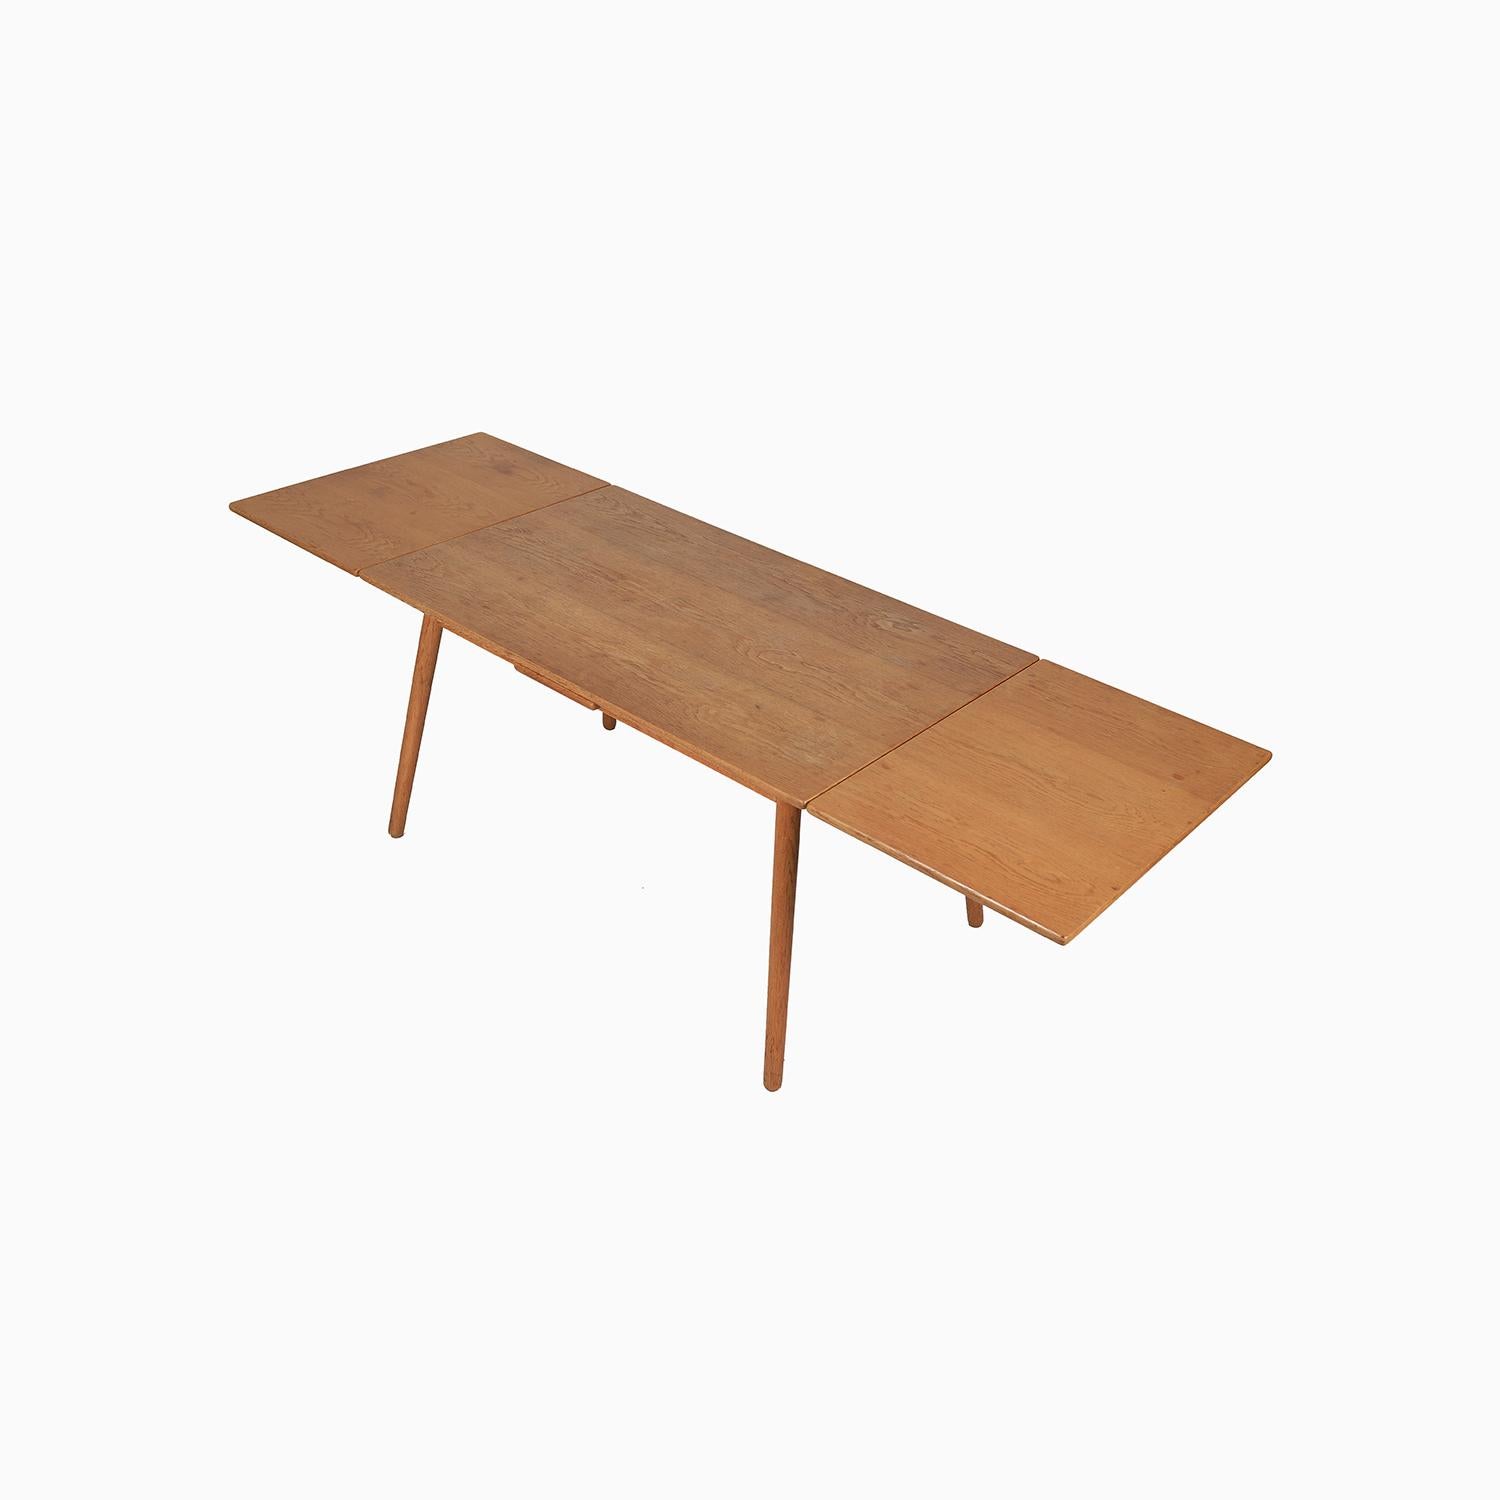 20th Century Danish Modern Poul Volther Oak Dining Table For Sale